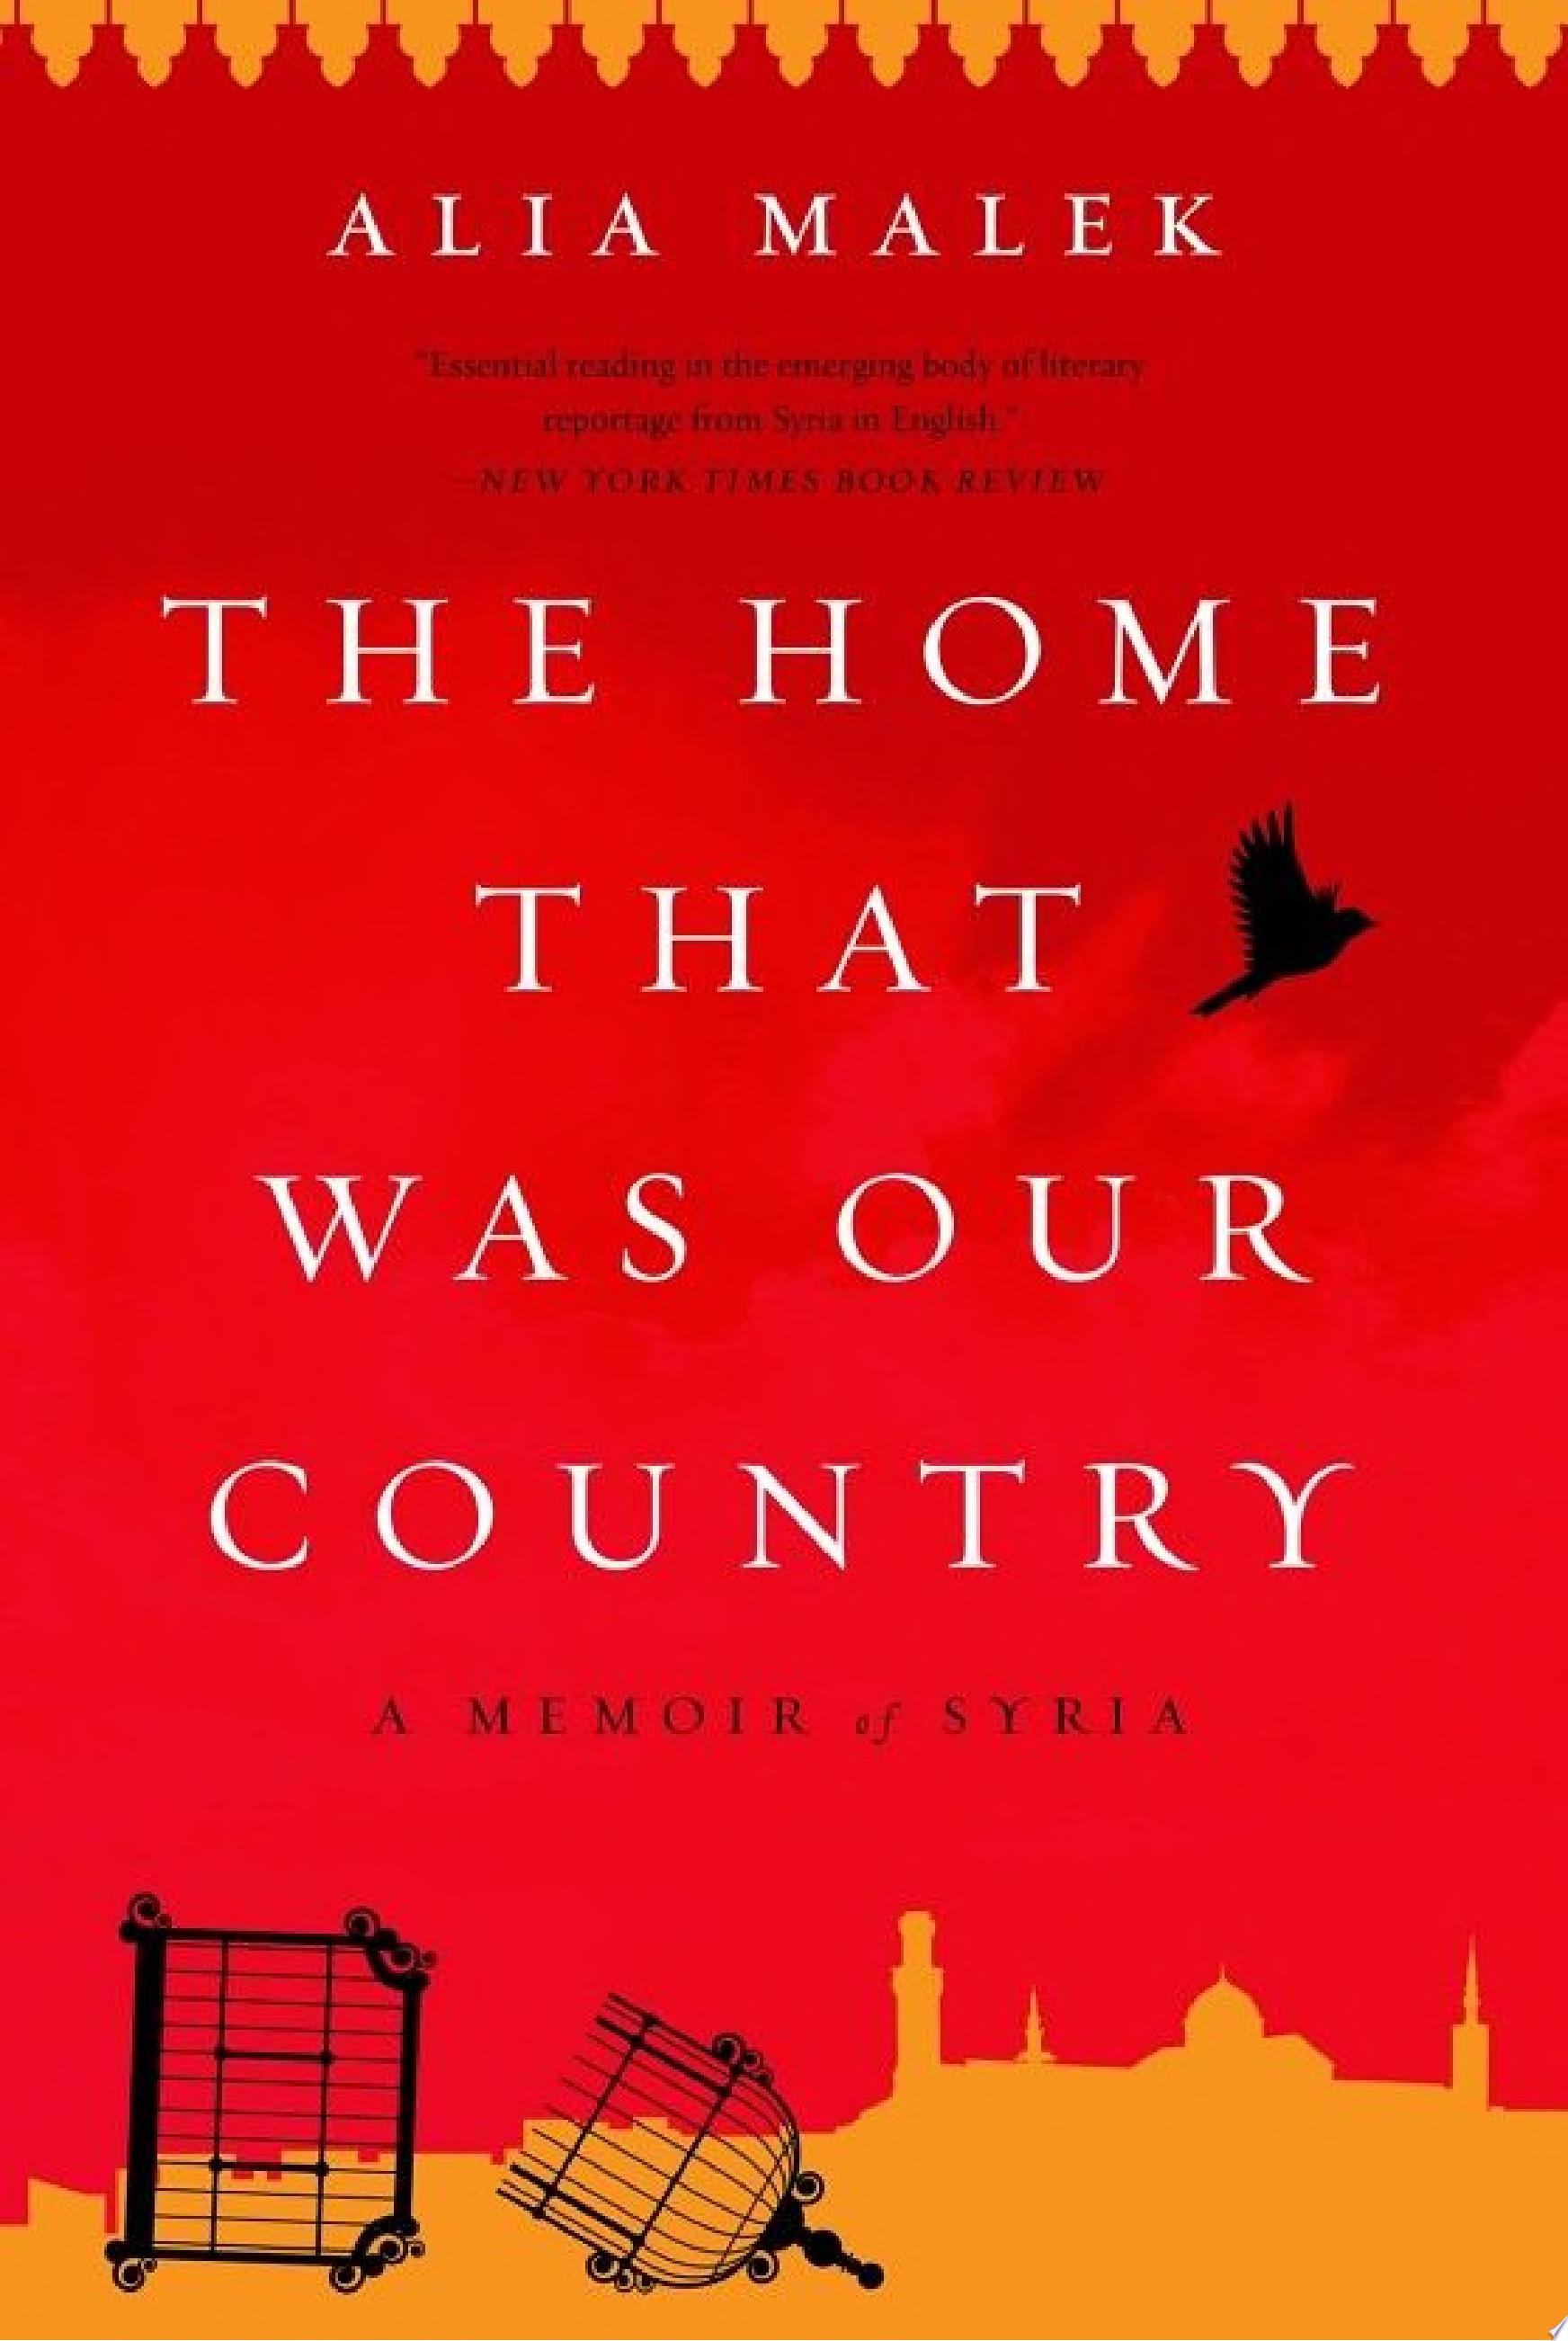 Image for "The Home That Was Our Country"